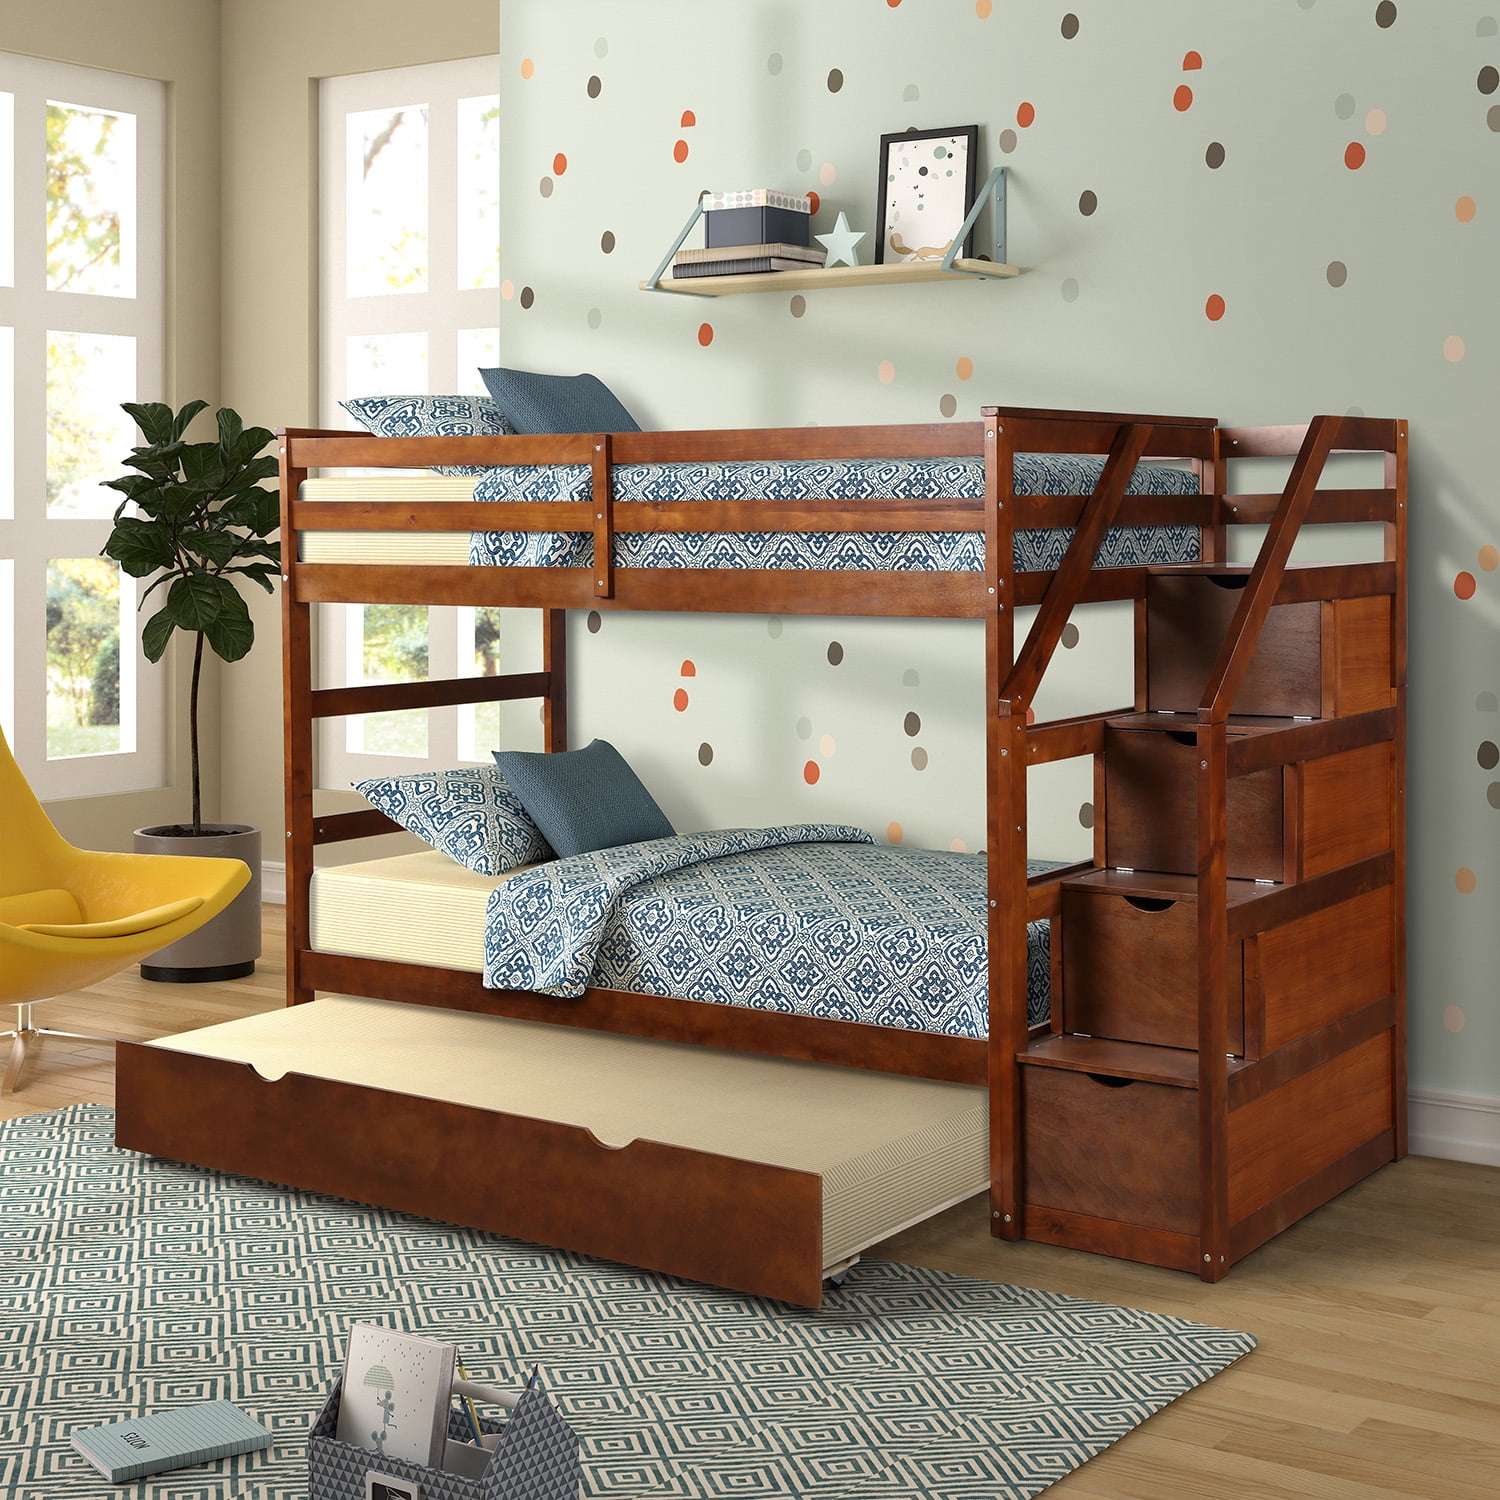 beds for 3 year olds